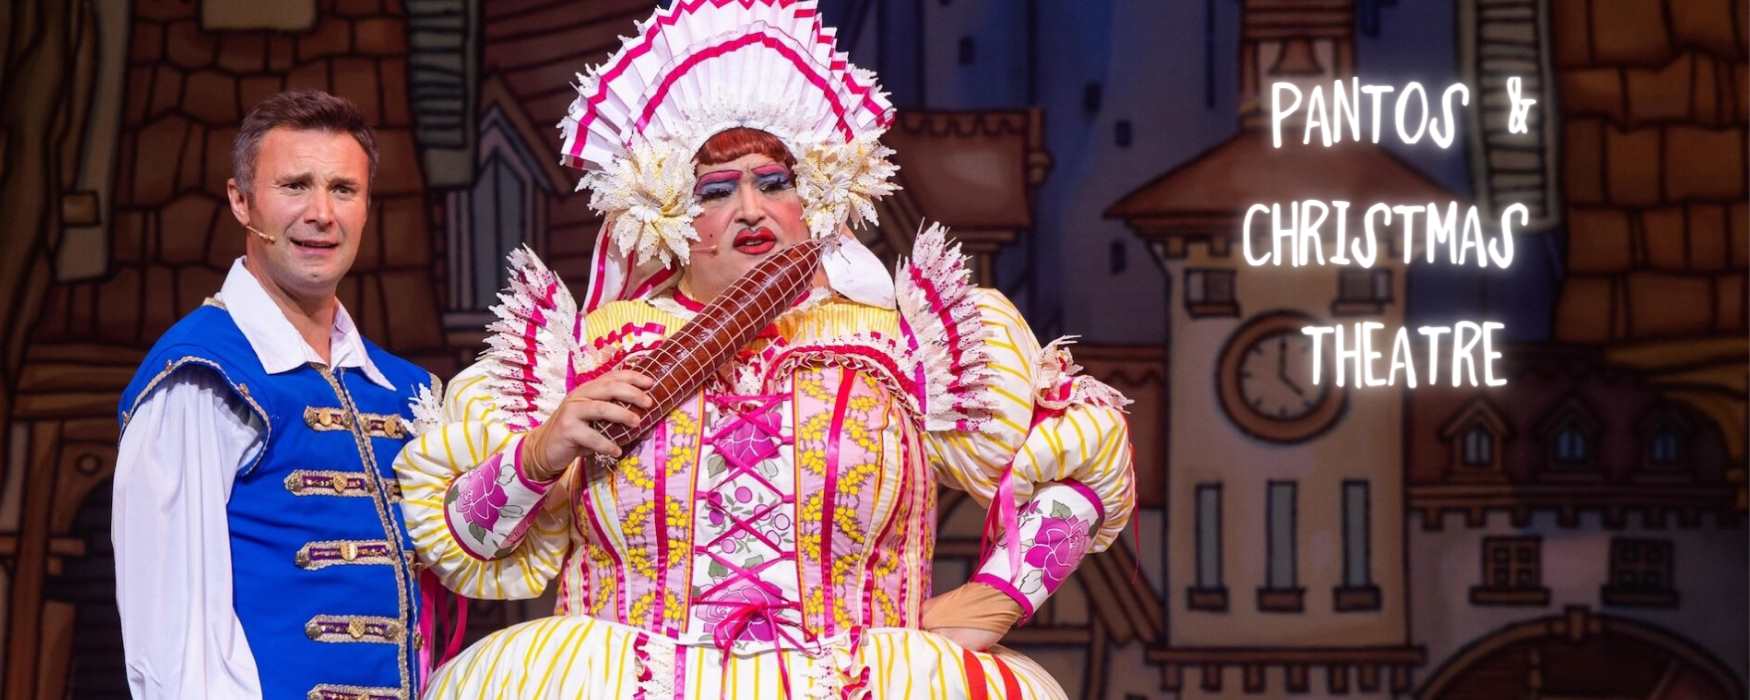 Pantomimes and Christmas Shows in Stoke-on-Trent